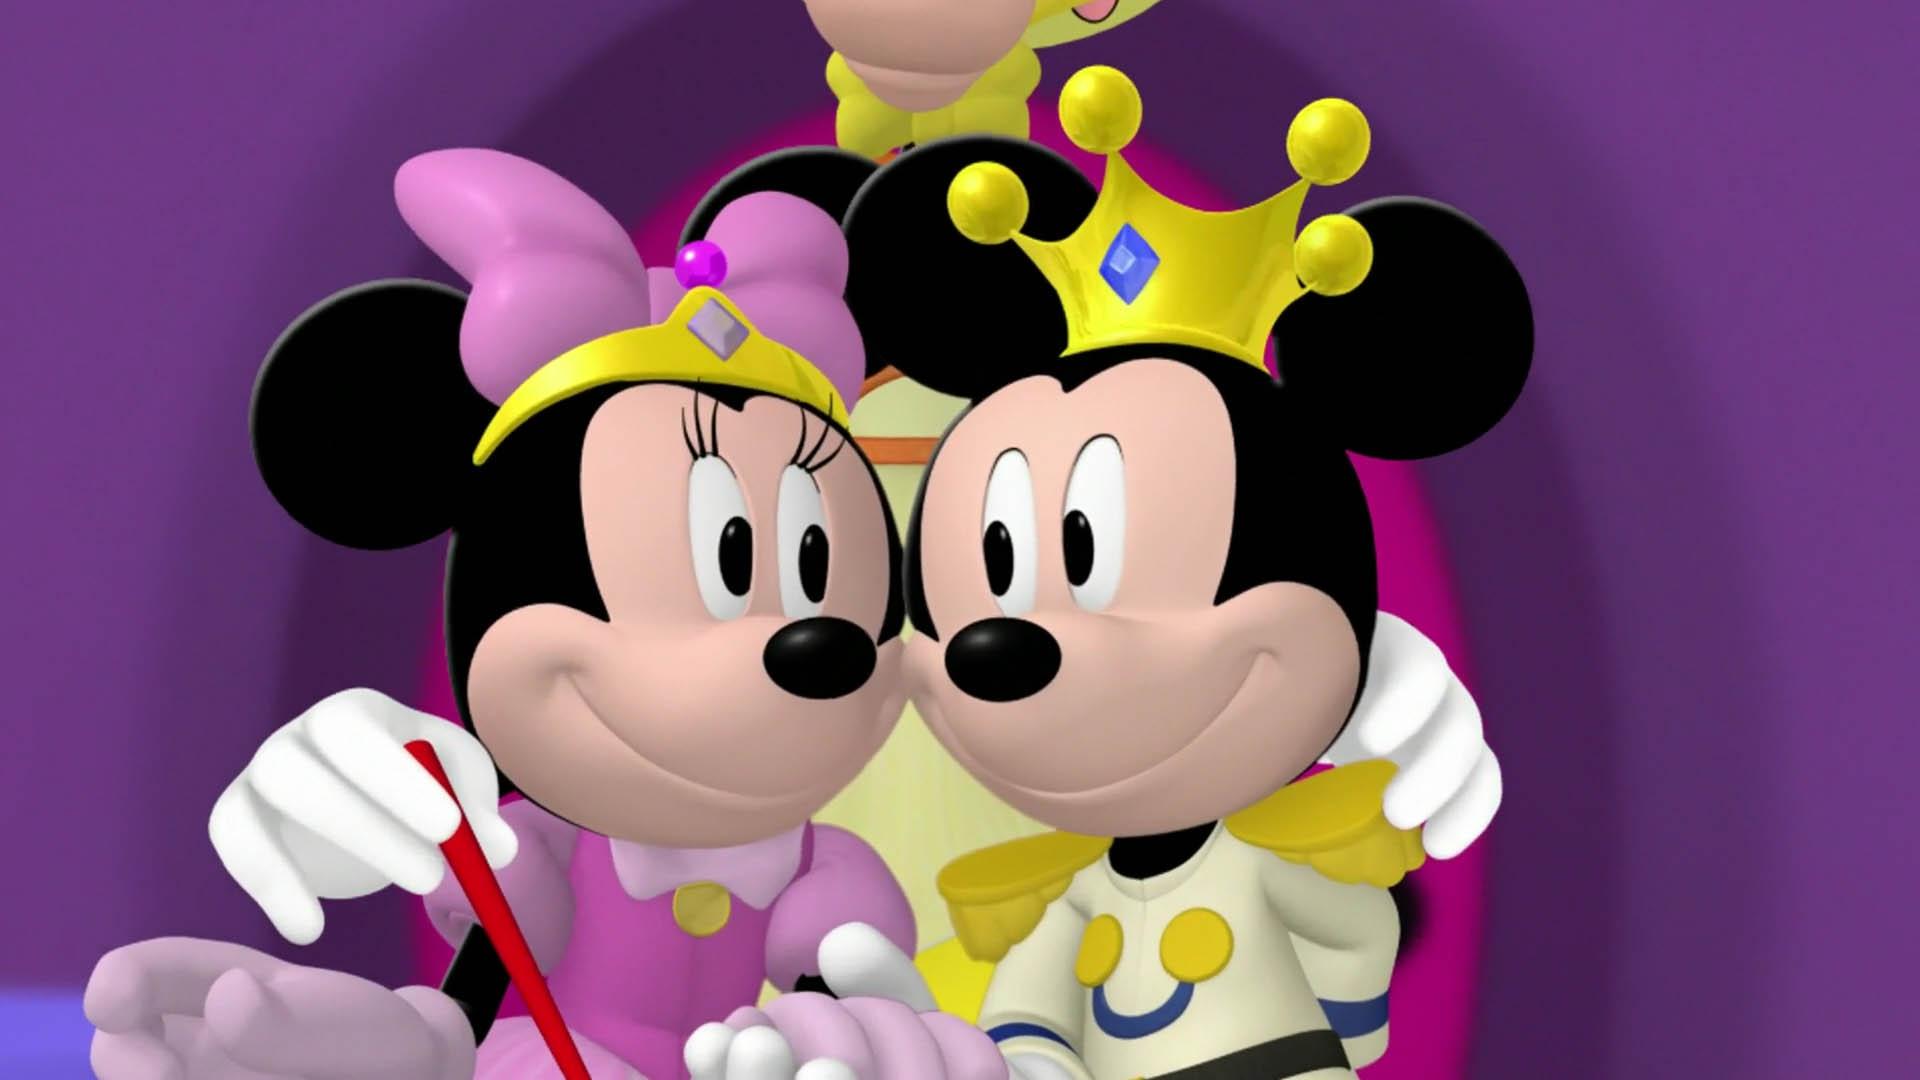 Mickey And Minnie Mouse Wallpaper Free. Image Wallpaper